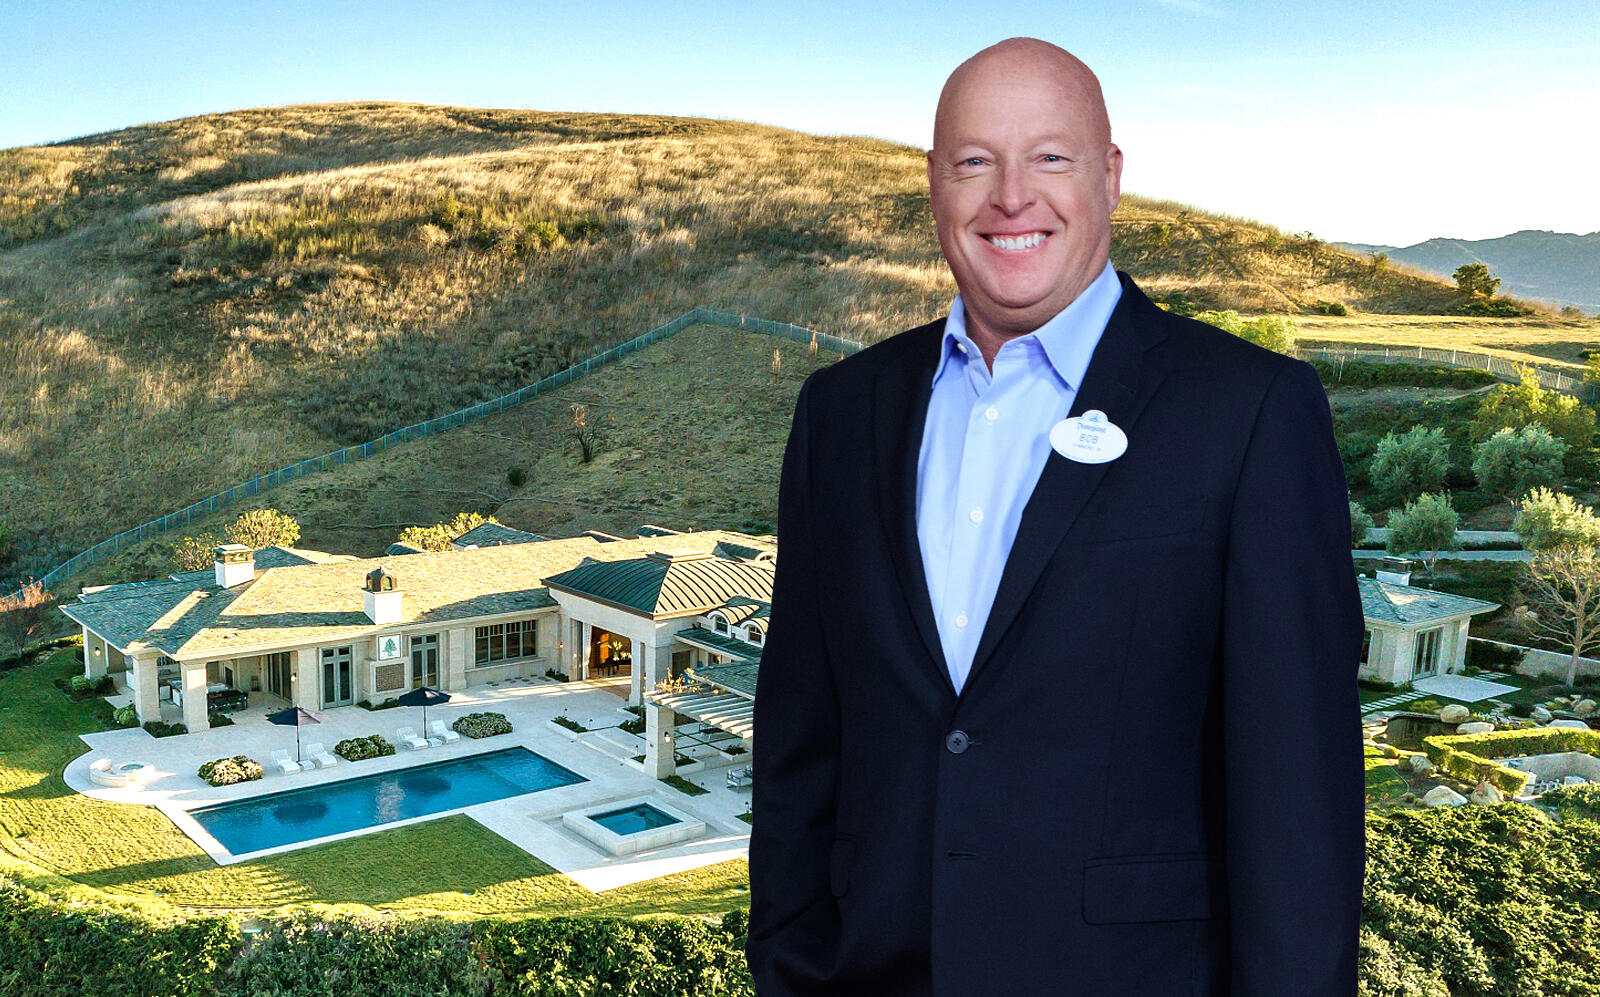 Disney CEO Bob Chapek buys a $13M estate after laying off thousands of employees. (Getty, Jordan Cohen)